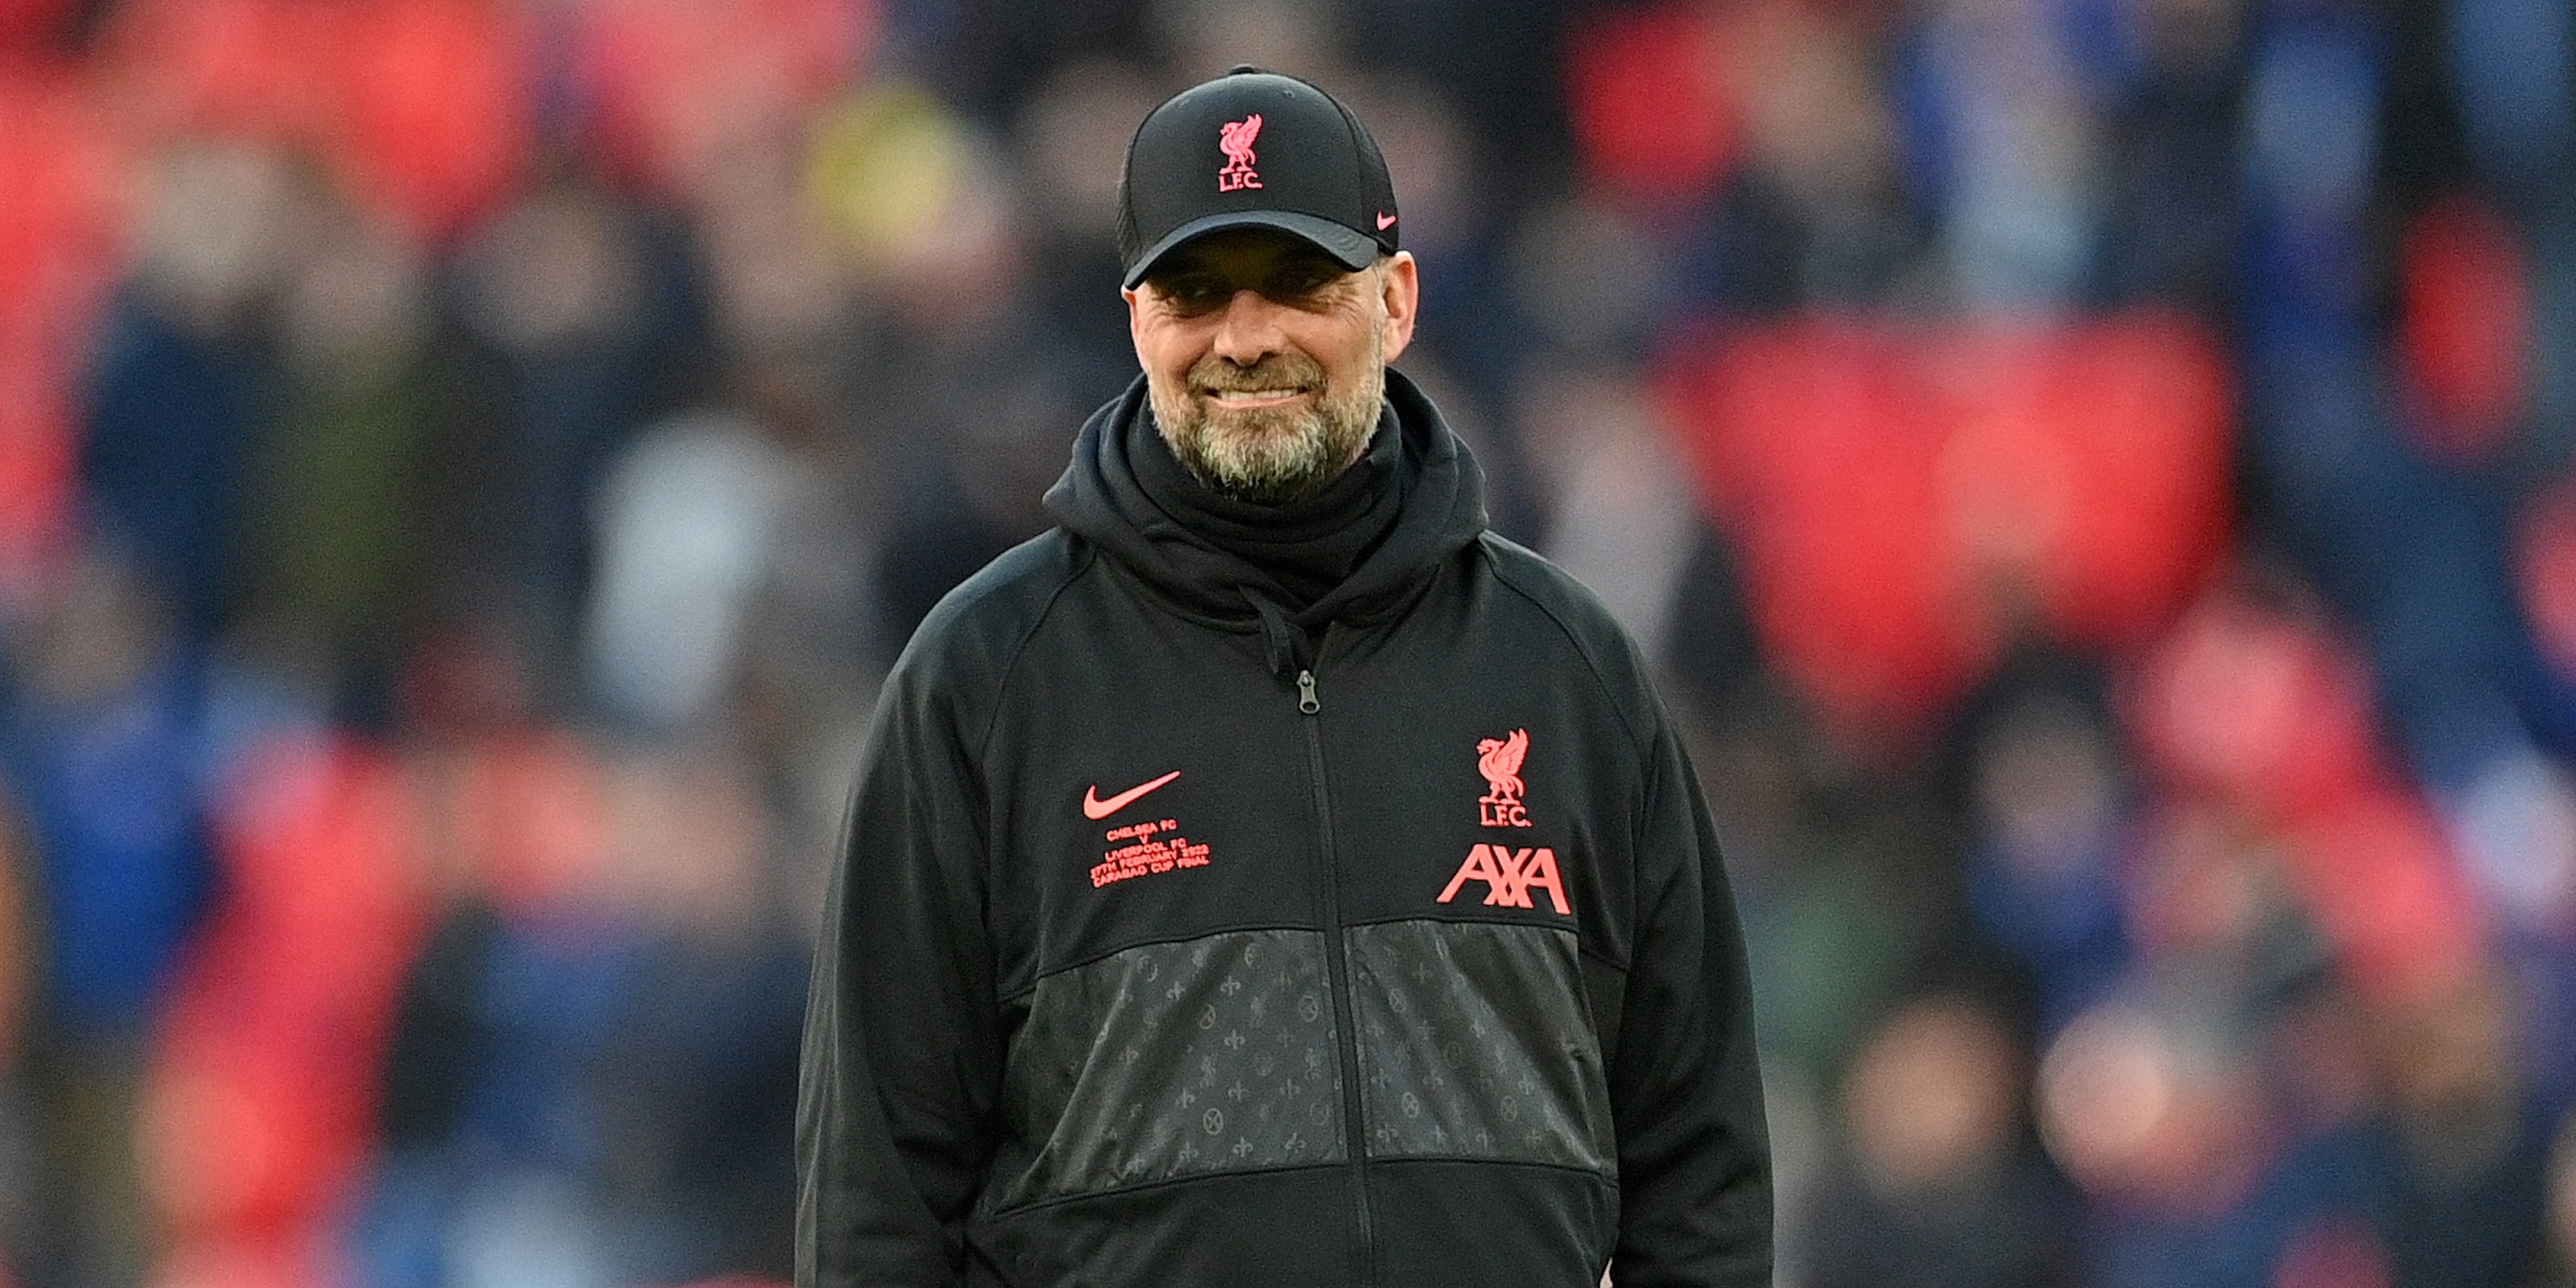 ‘I’m sure’ – Fabrizio Romano provides update on Jurgen Klopp’s Liverpool future with German’s current deal set to expire in 2024